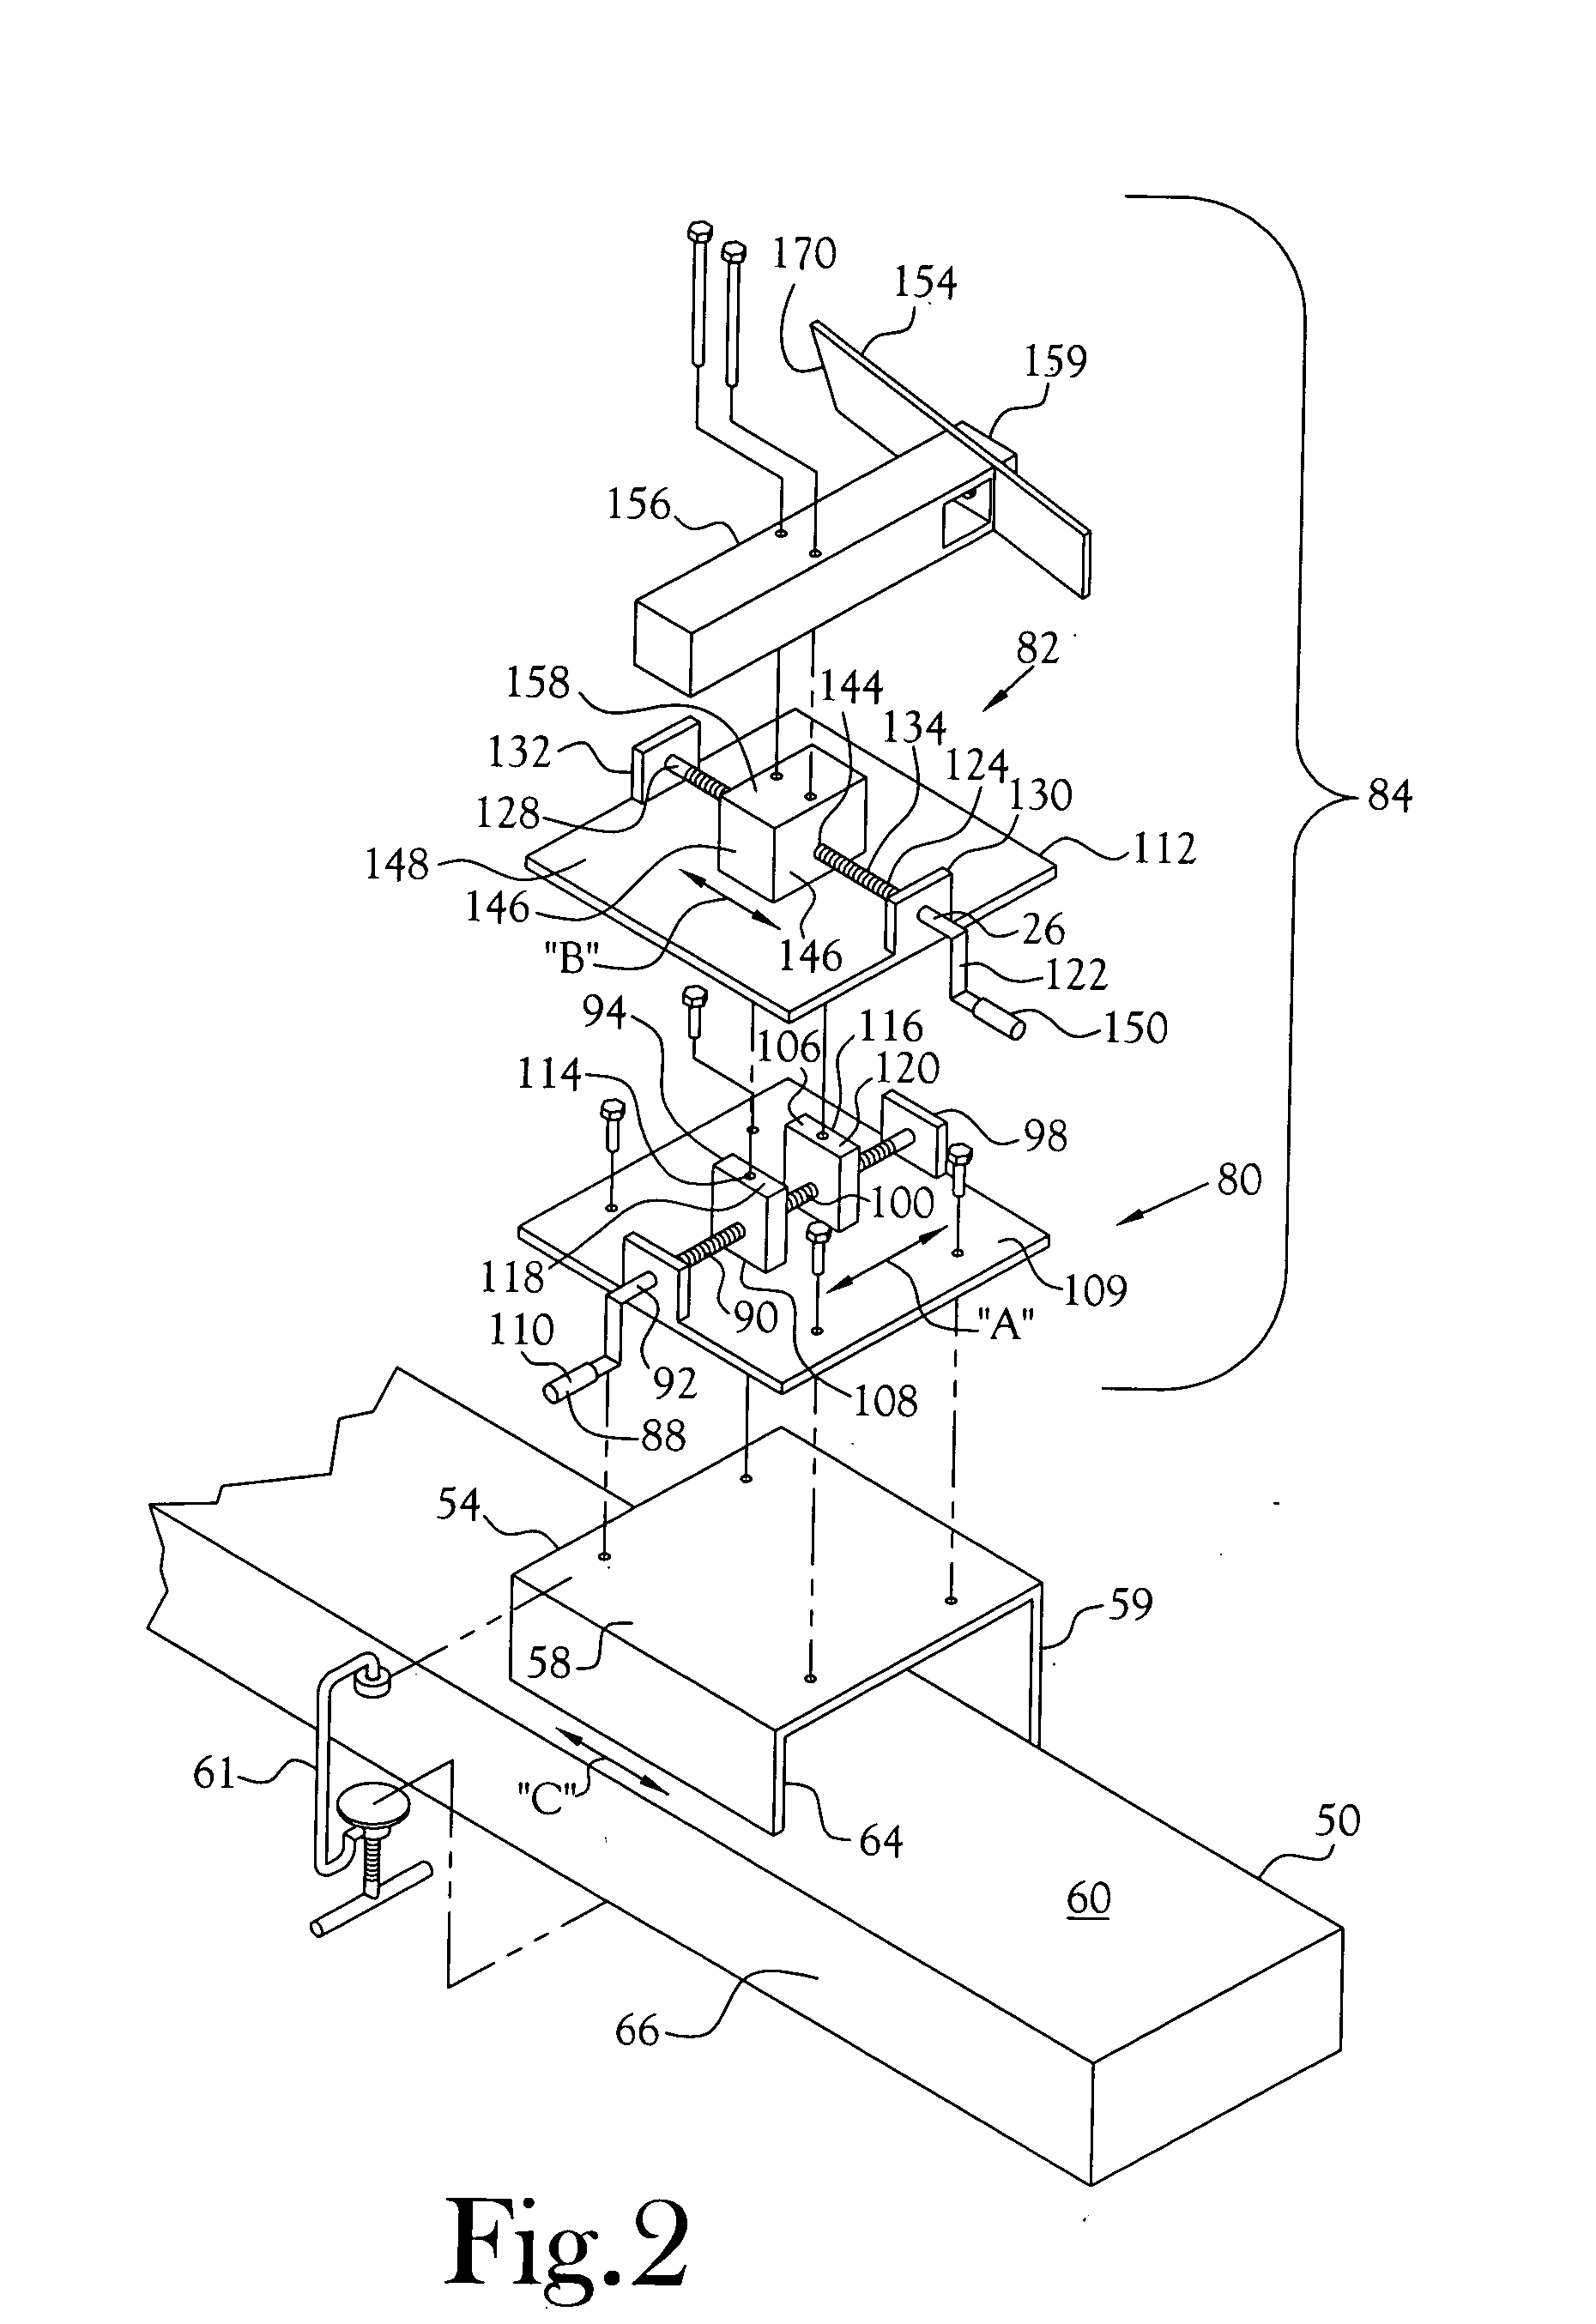 Paper roll edge trimming method and apparatus